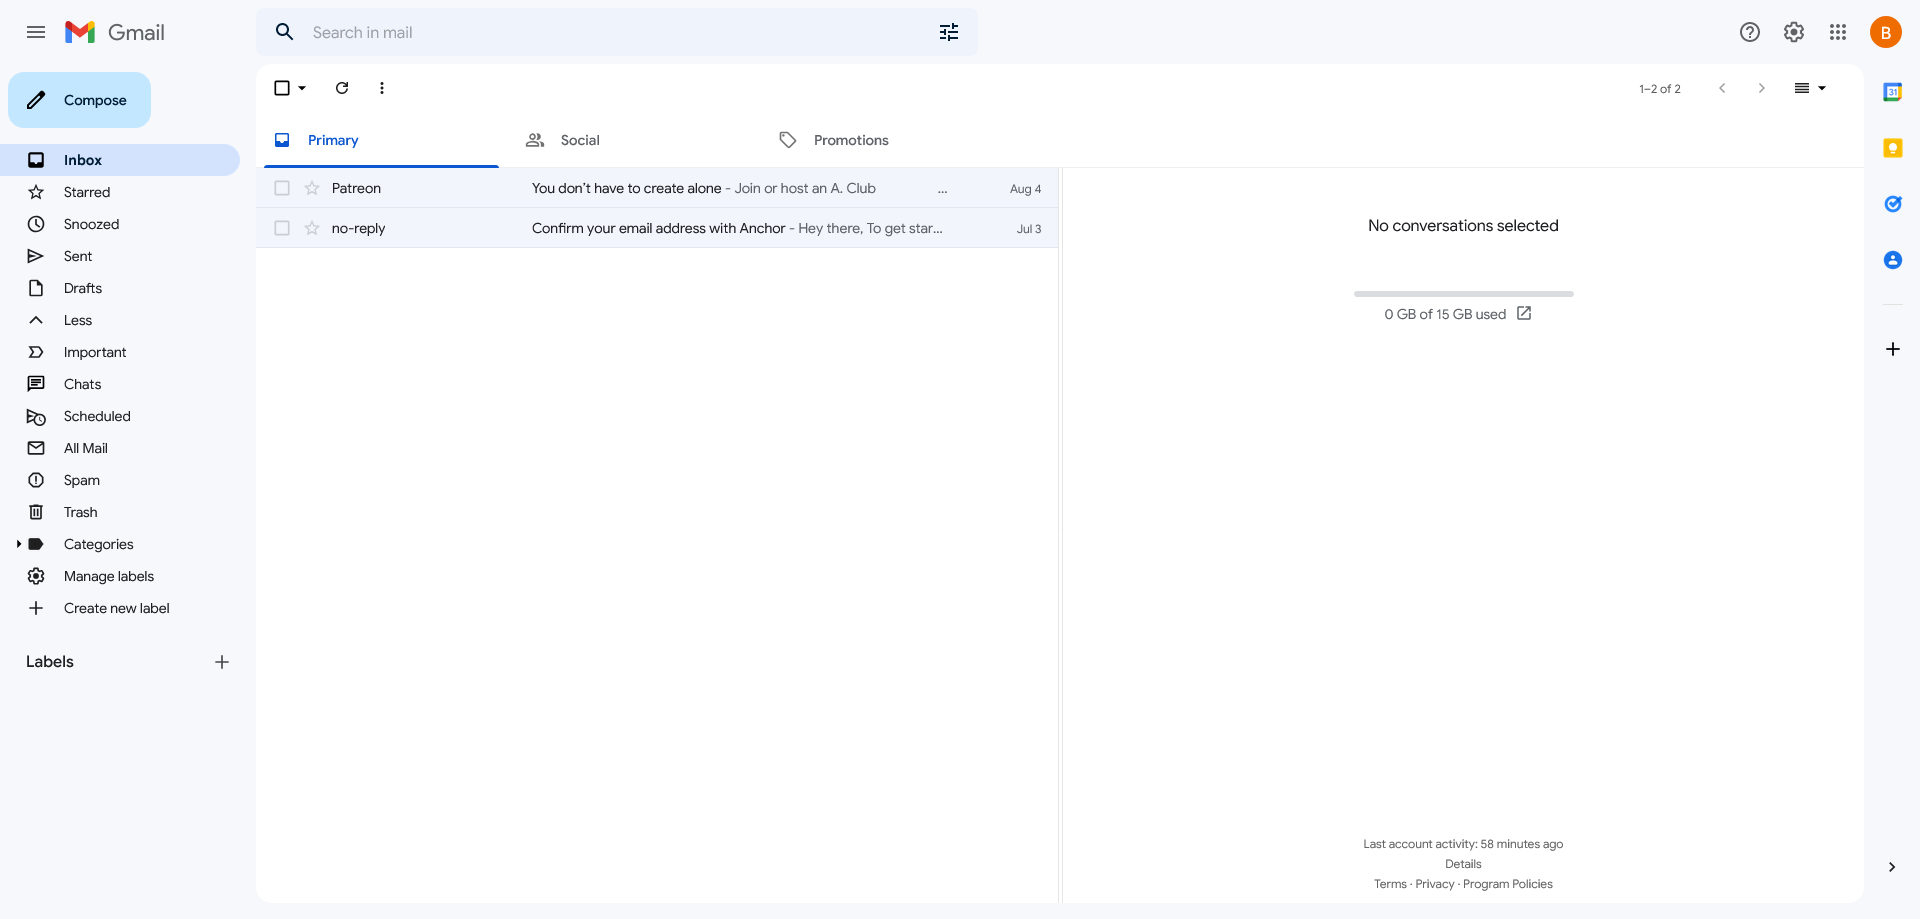 Chat and Meet turned off in Gmail's new 2022 design